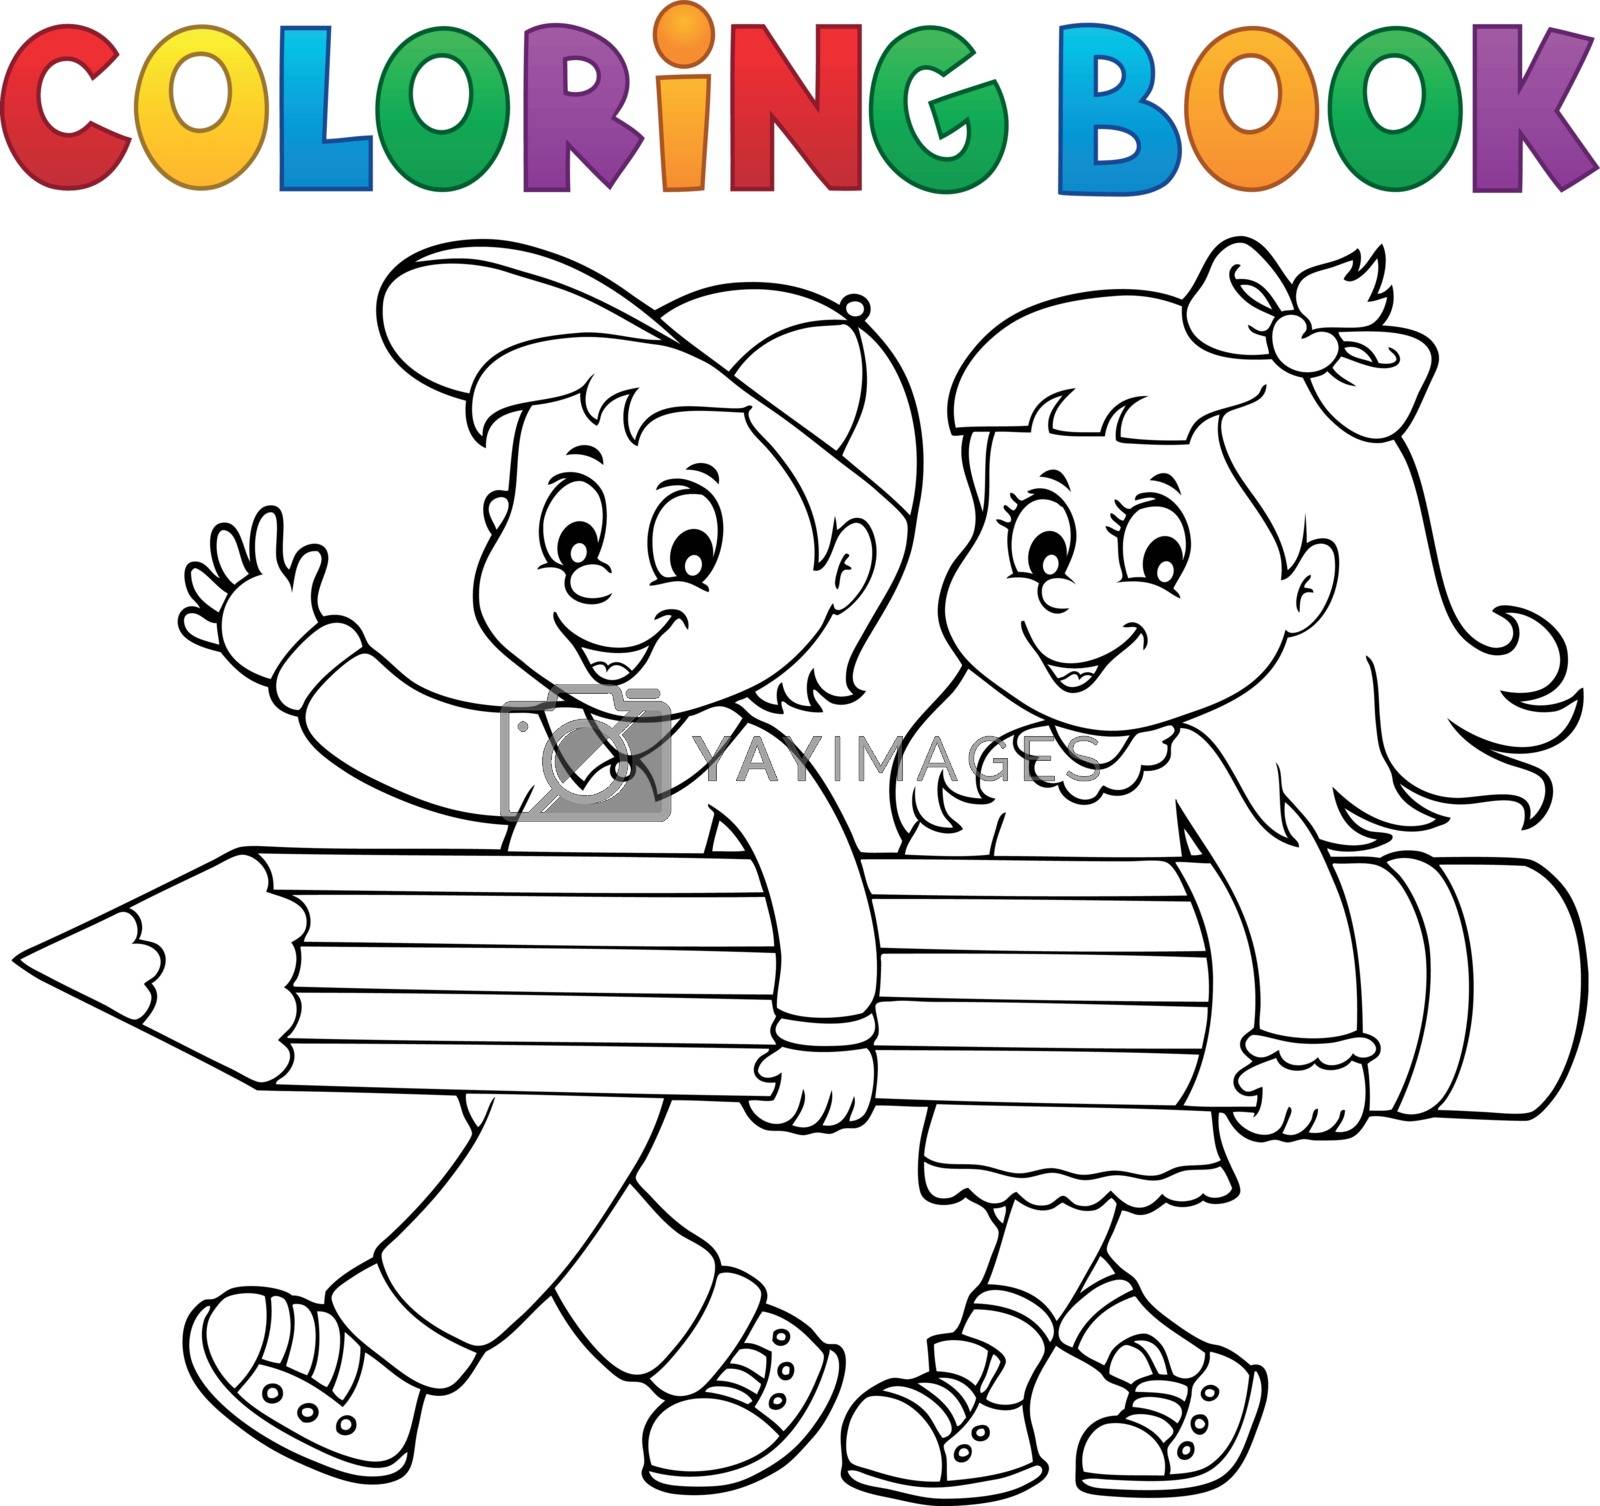 Royalty free image of Coloring book children holding pencil by clairev